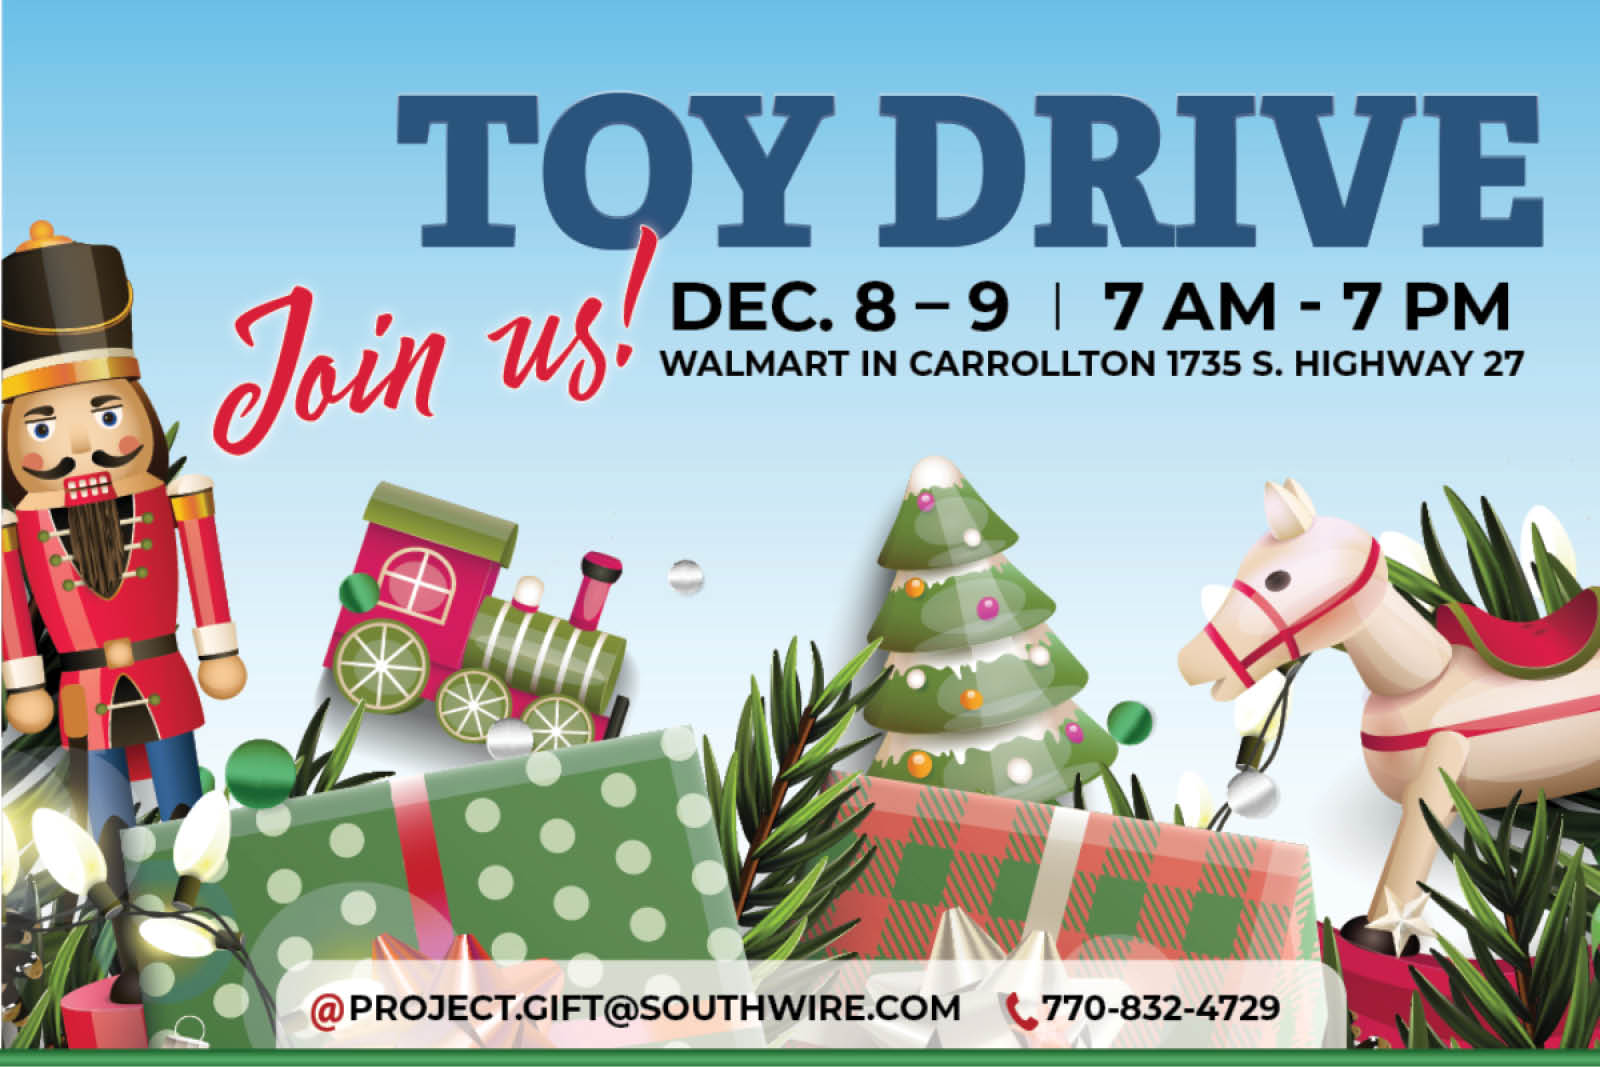 Southwire to Host Drive-Thru Toys for Tots Event in Carrollton